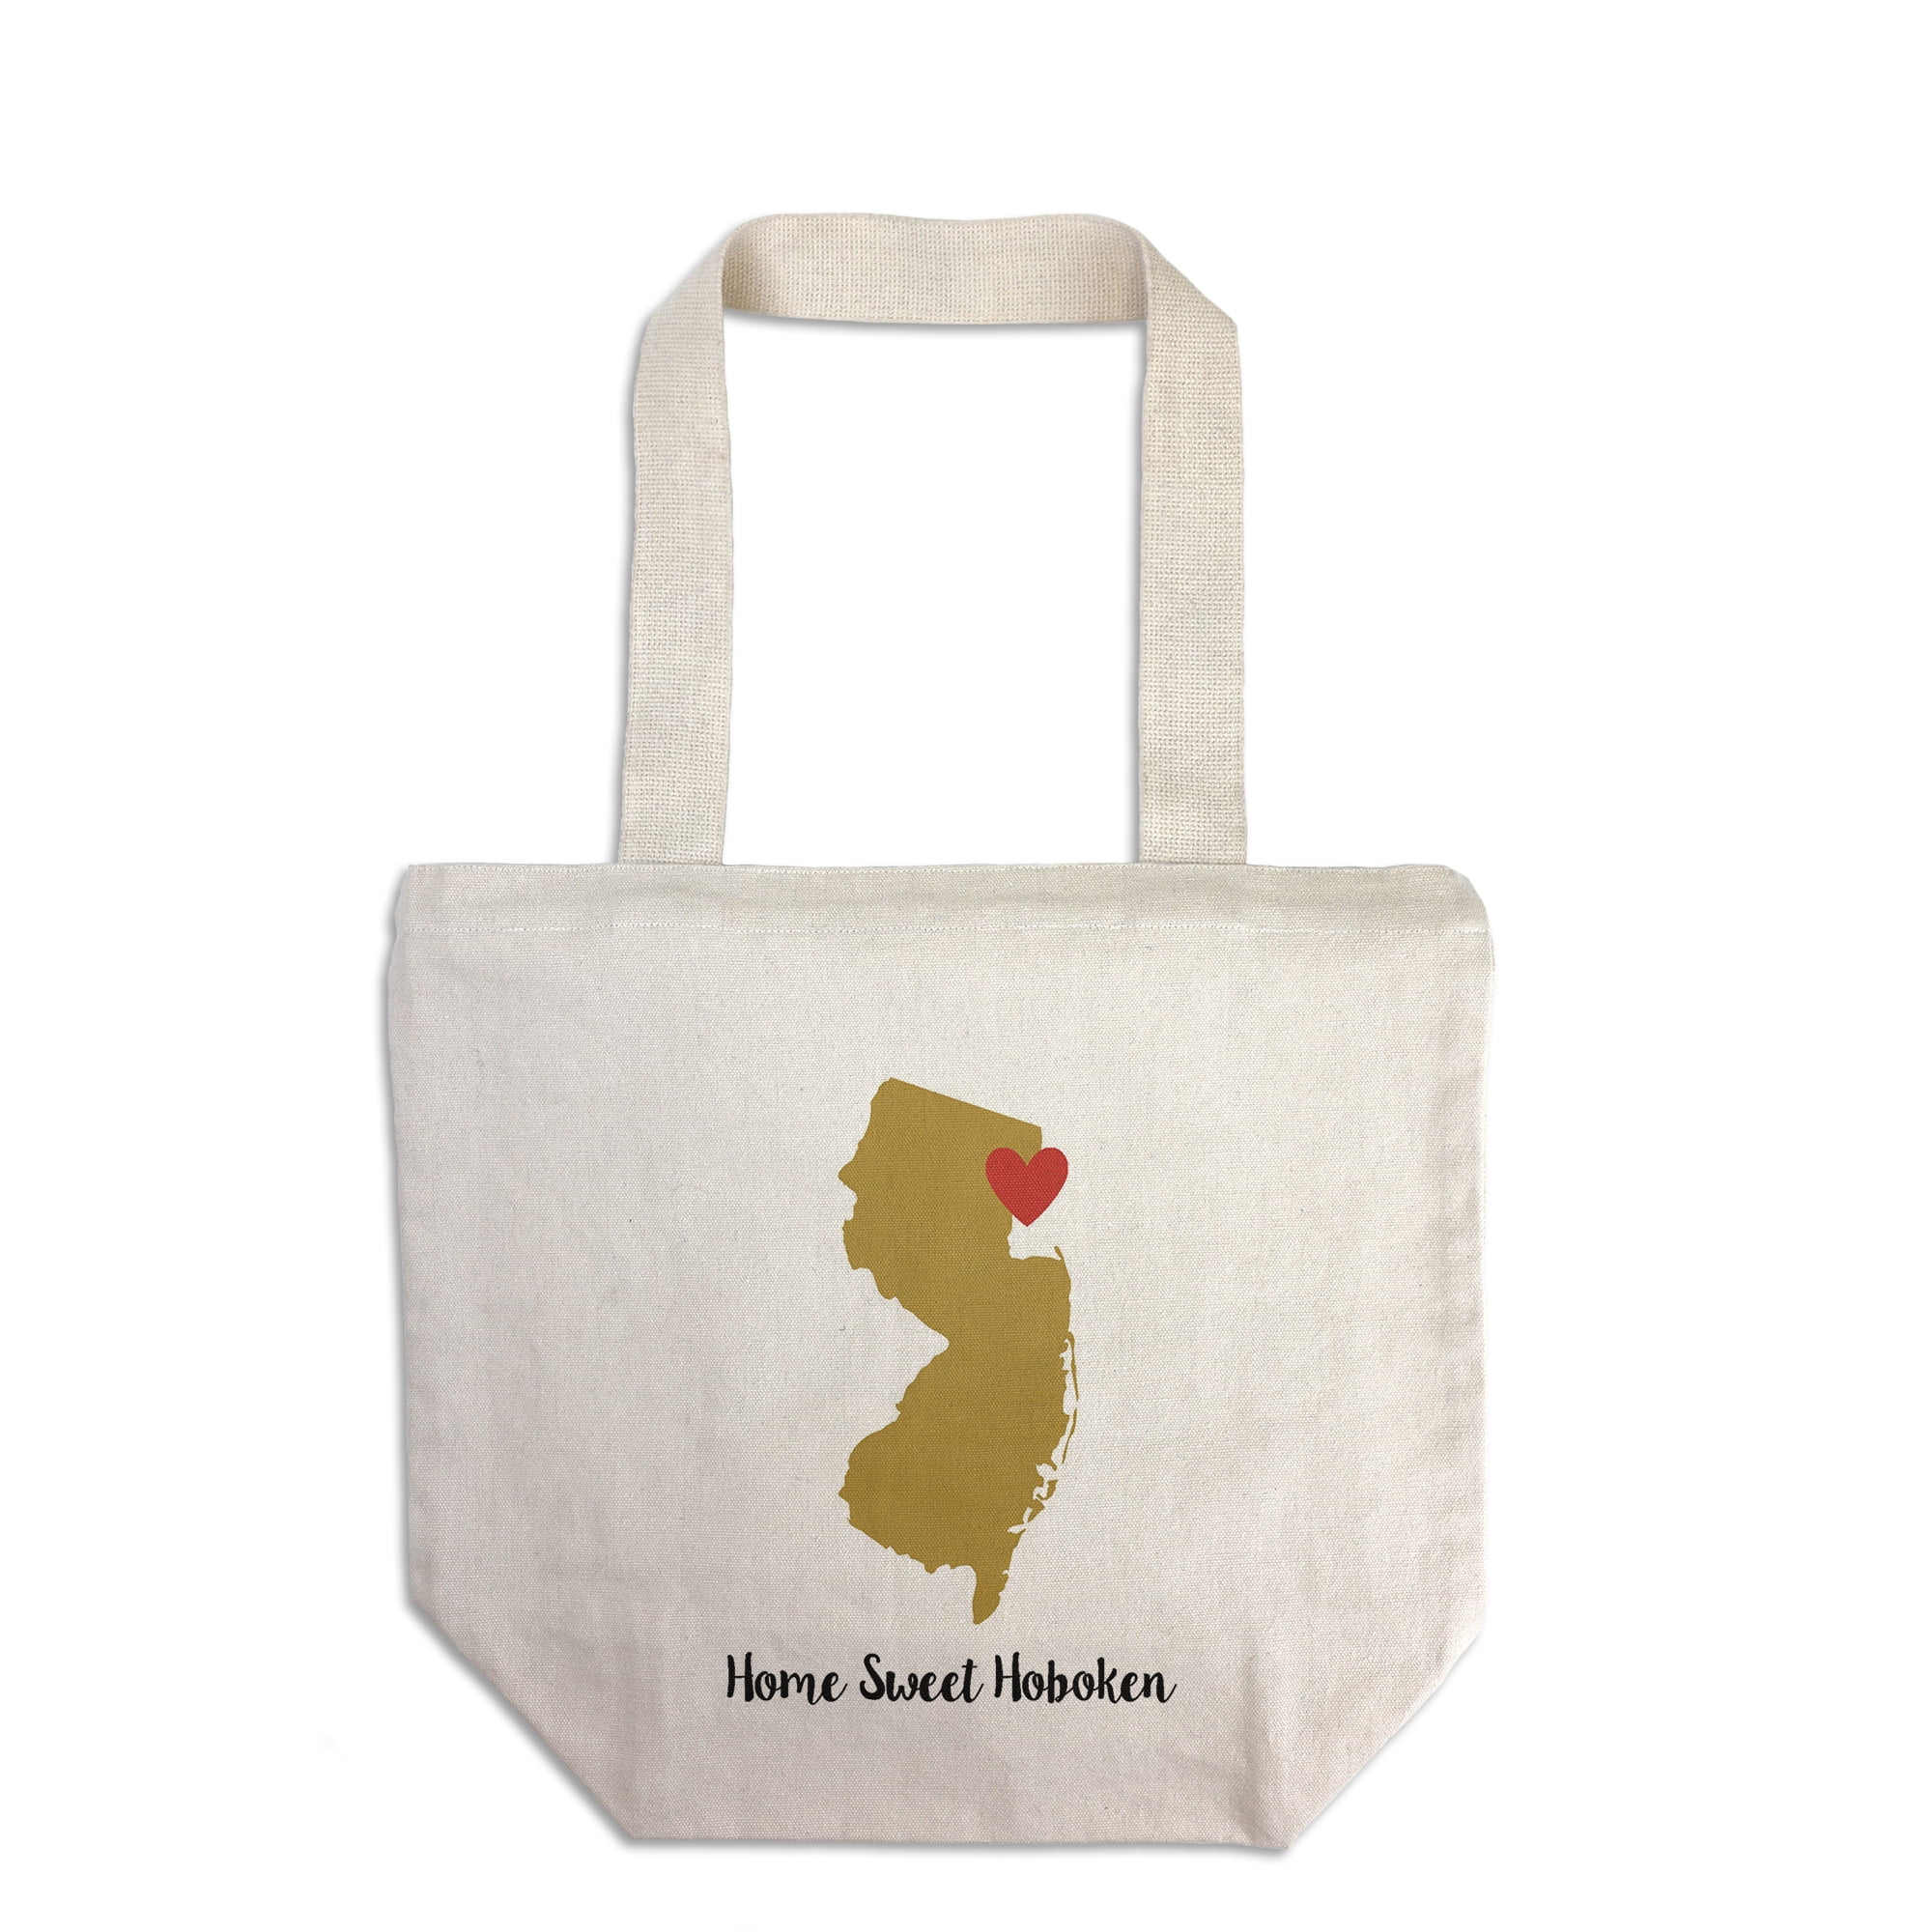  CafePress Heart New Jersey Tote Bag Canvas Tote